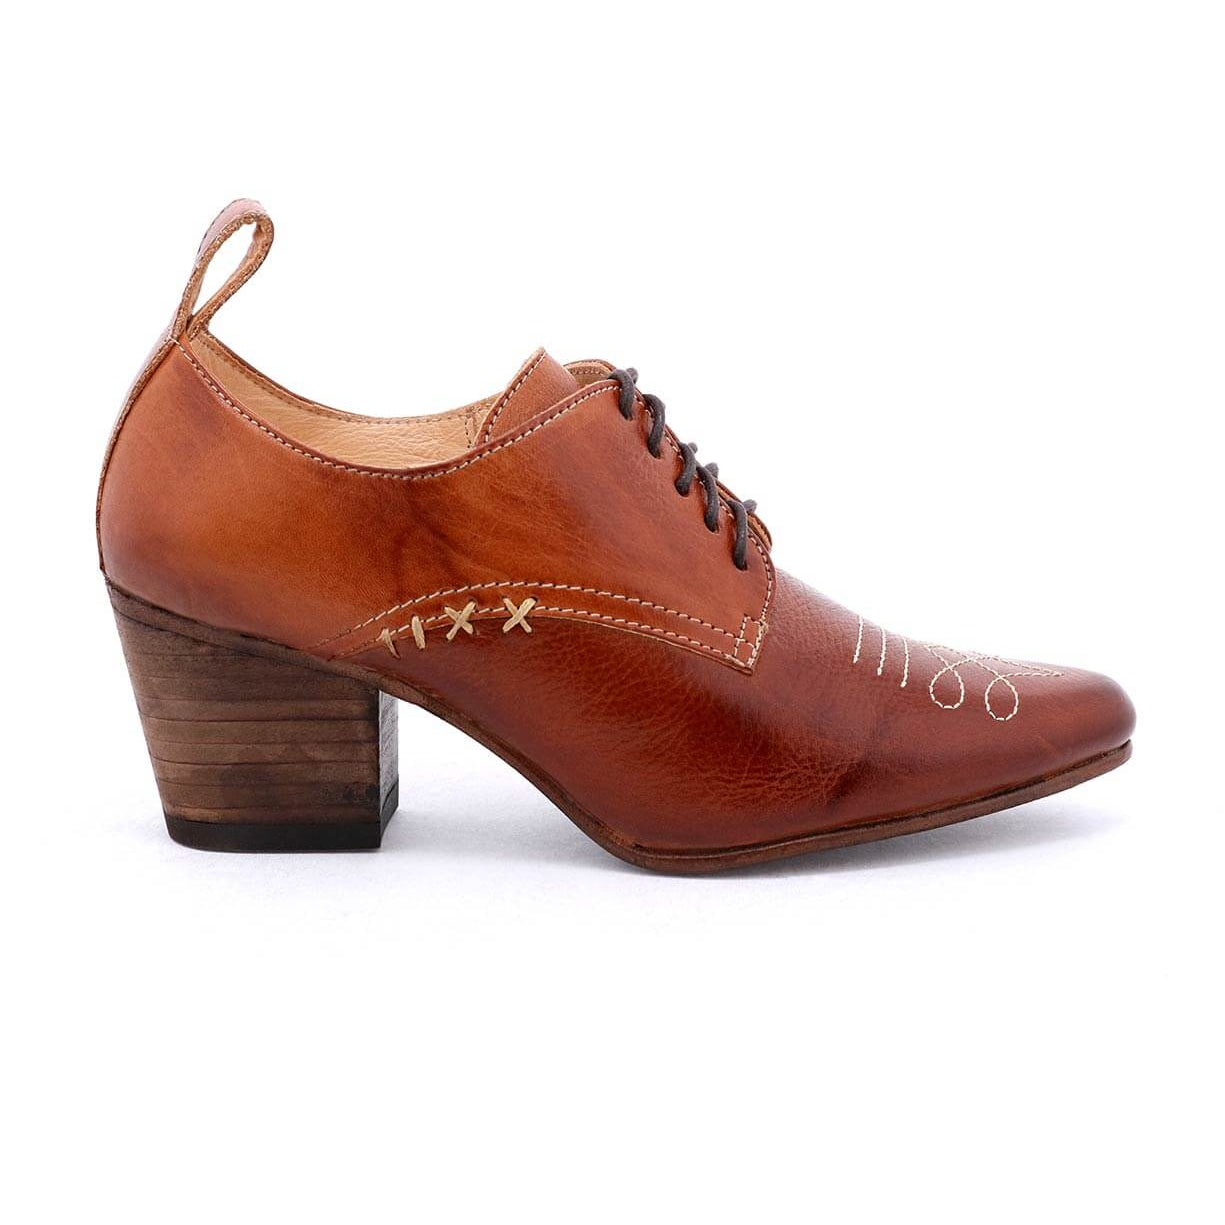 A Victorian-inspired women's Braunstone oxford shoe by Oak Tree Farms with a leather lace-up design and a wooden heel, making it the perfect dress shoe.